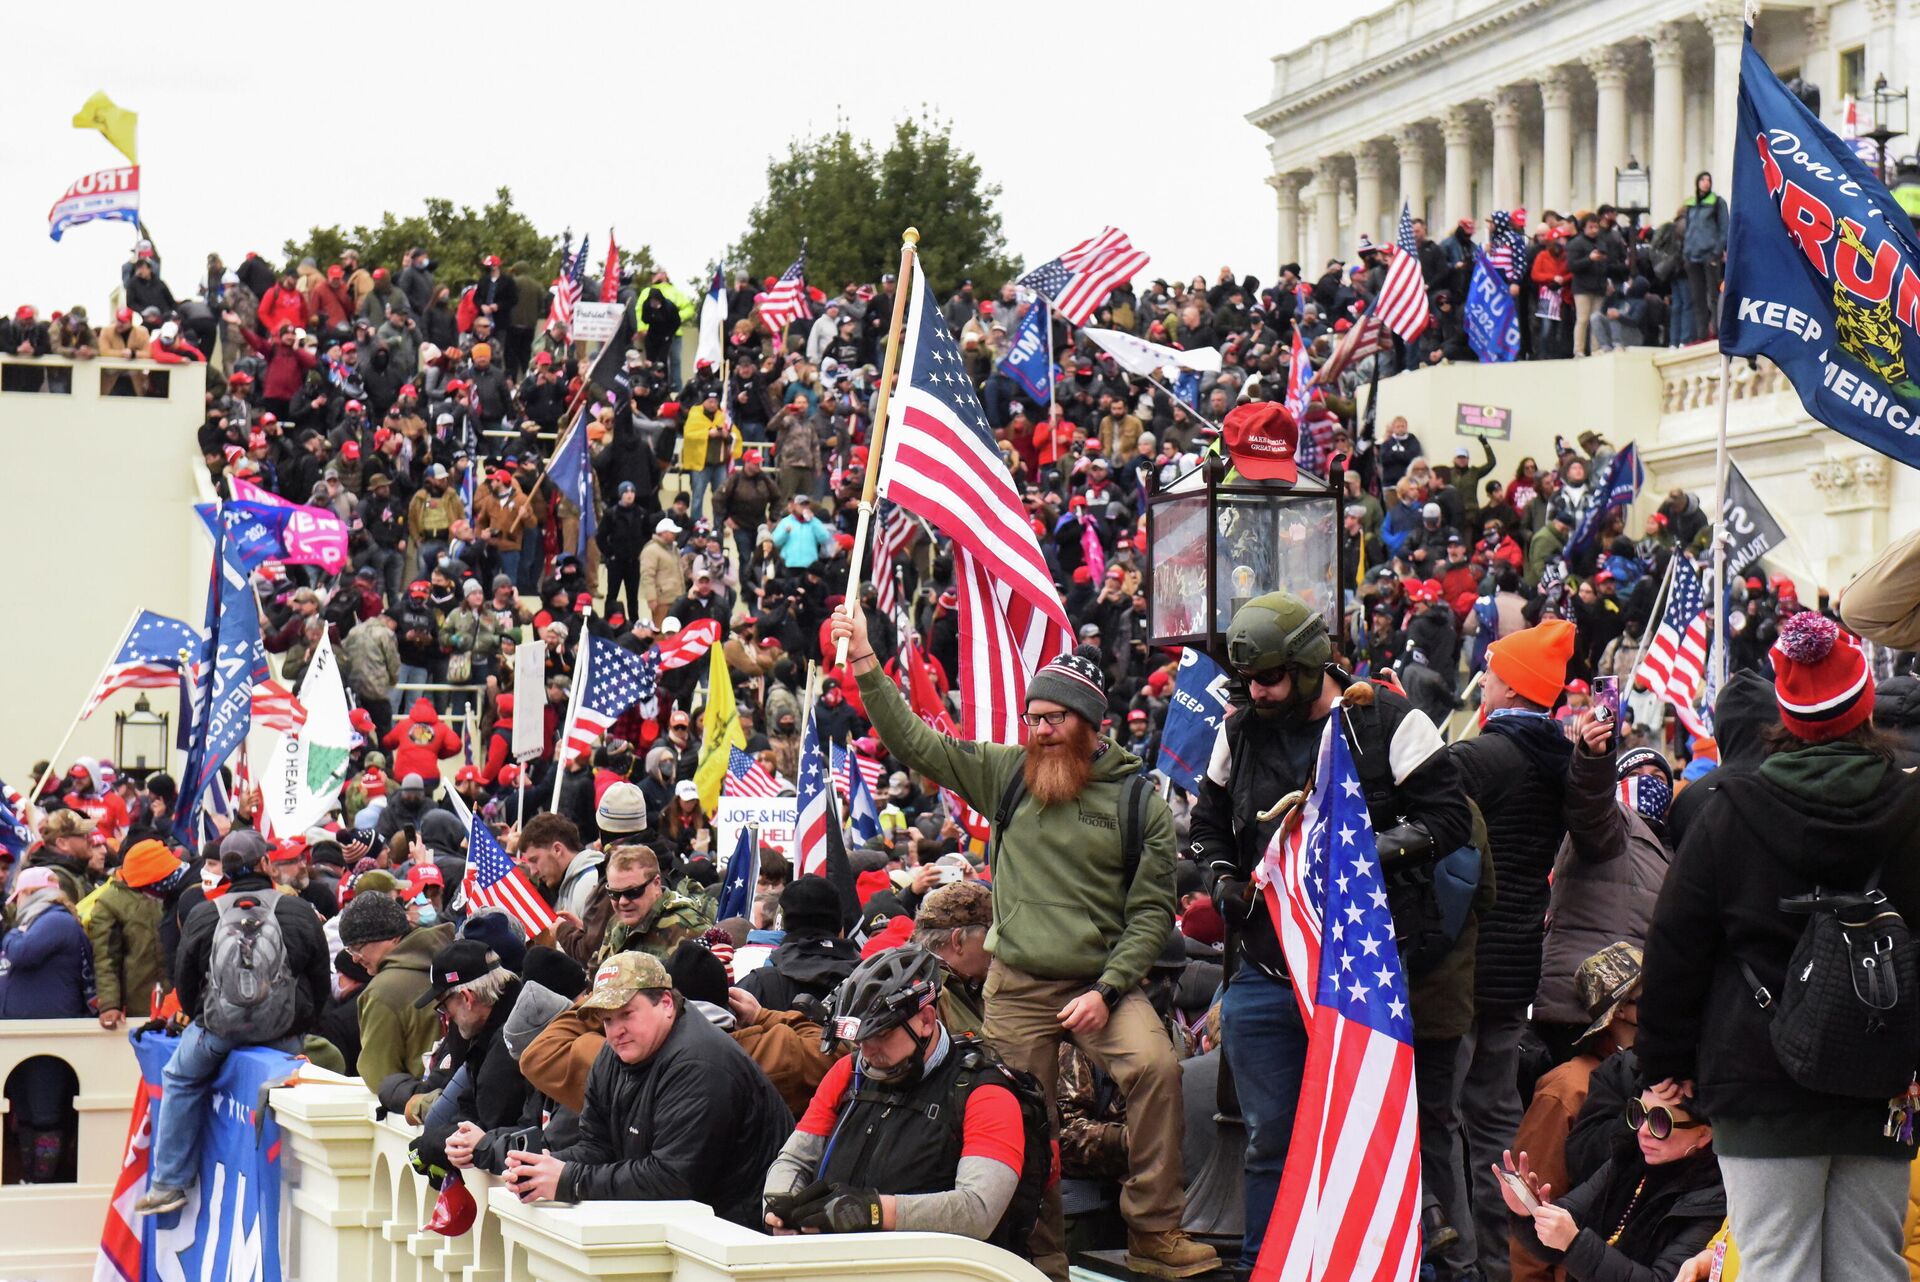 Supporters of U.S. President Donald Trump gather in front of the U.S. Capitol Building in Washington, U.S. January 6, 2021 - Sputnik International, 1920, 18.09.2021